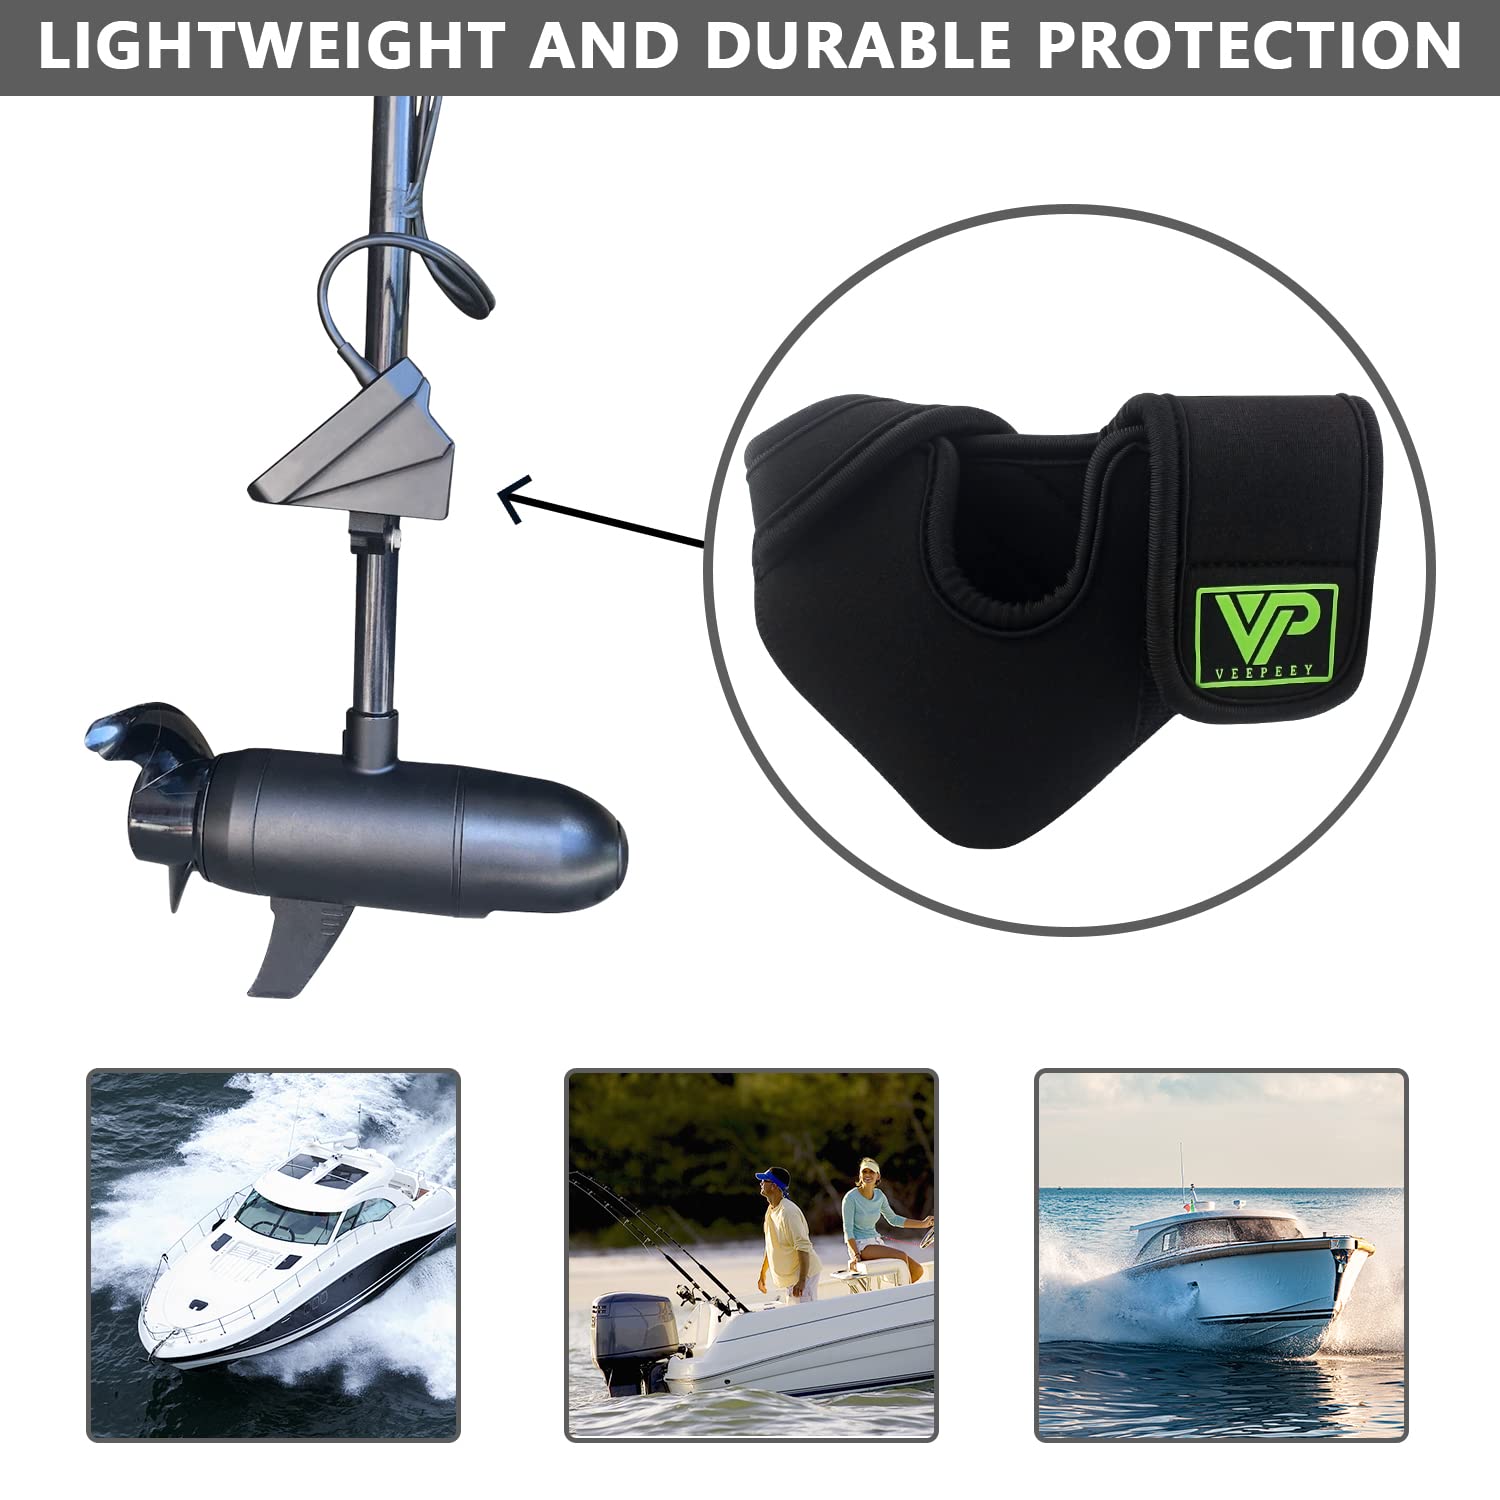 Transducer Cover, Veepeey livescope Cover fit Garmin lvs32 Transducer Lowrance, Travel Transducer Cover Great for Travel to Protect Your Pricey Transducer